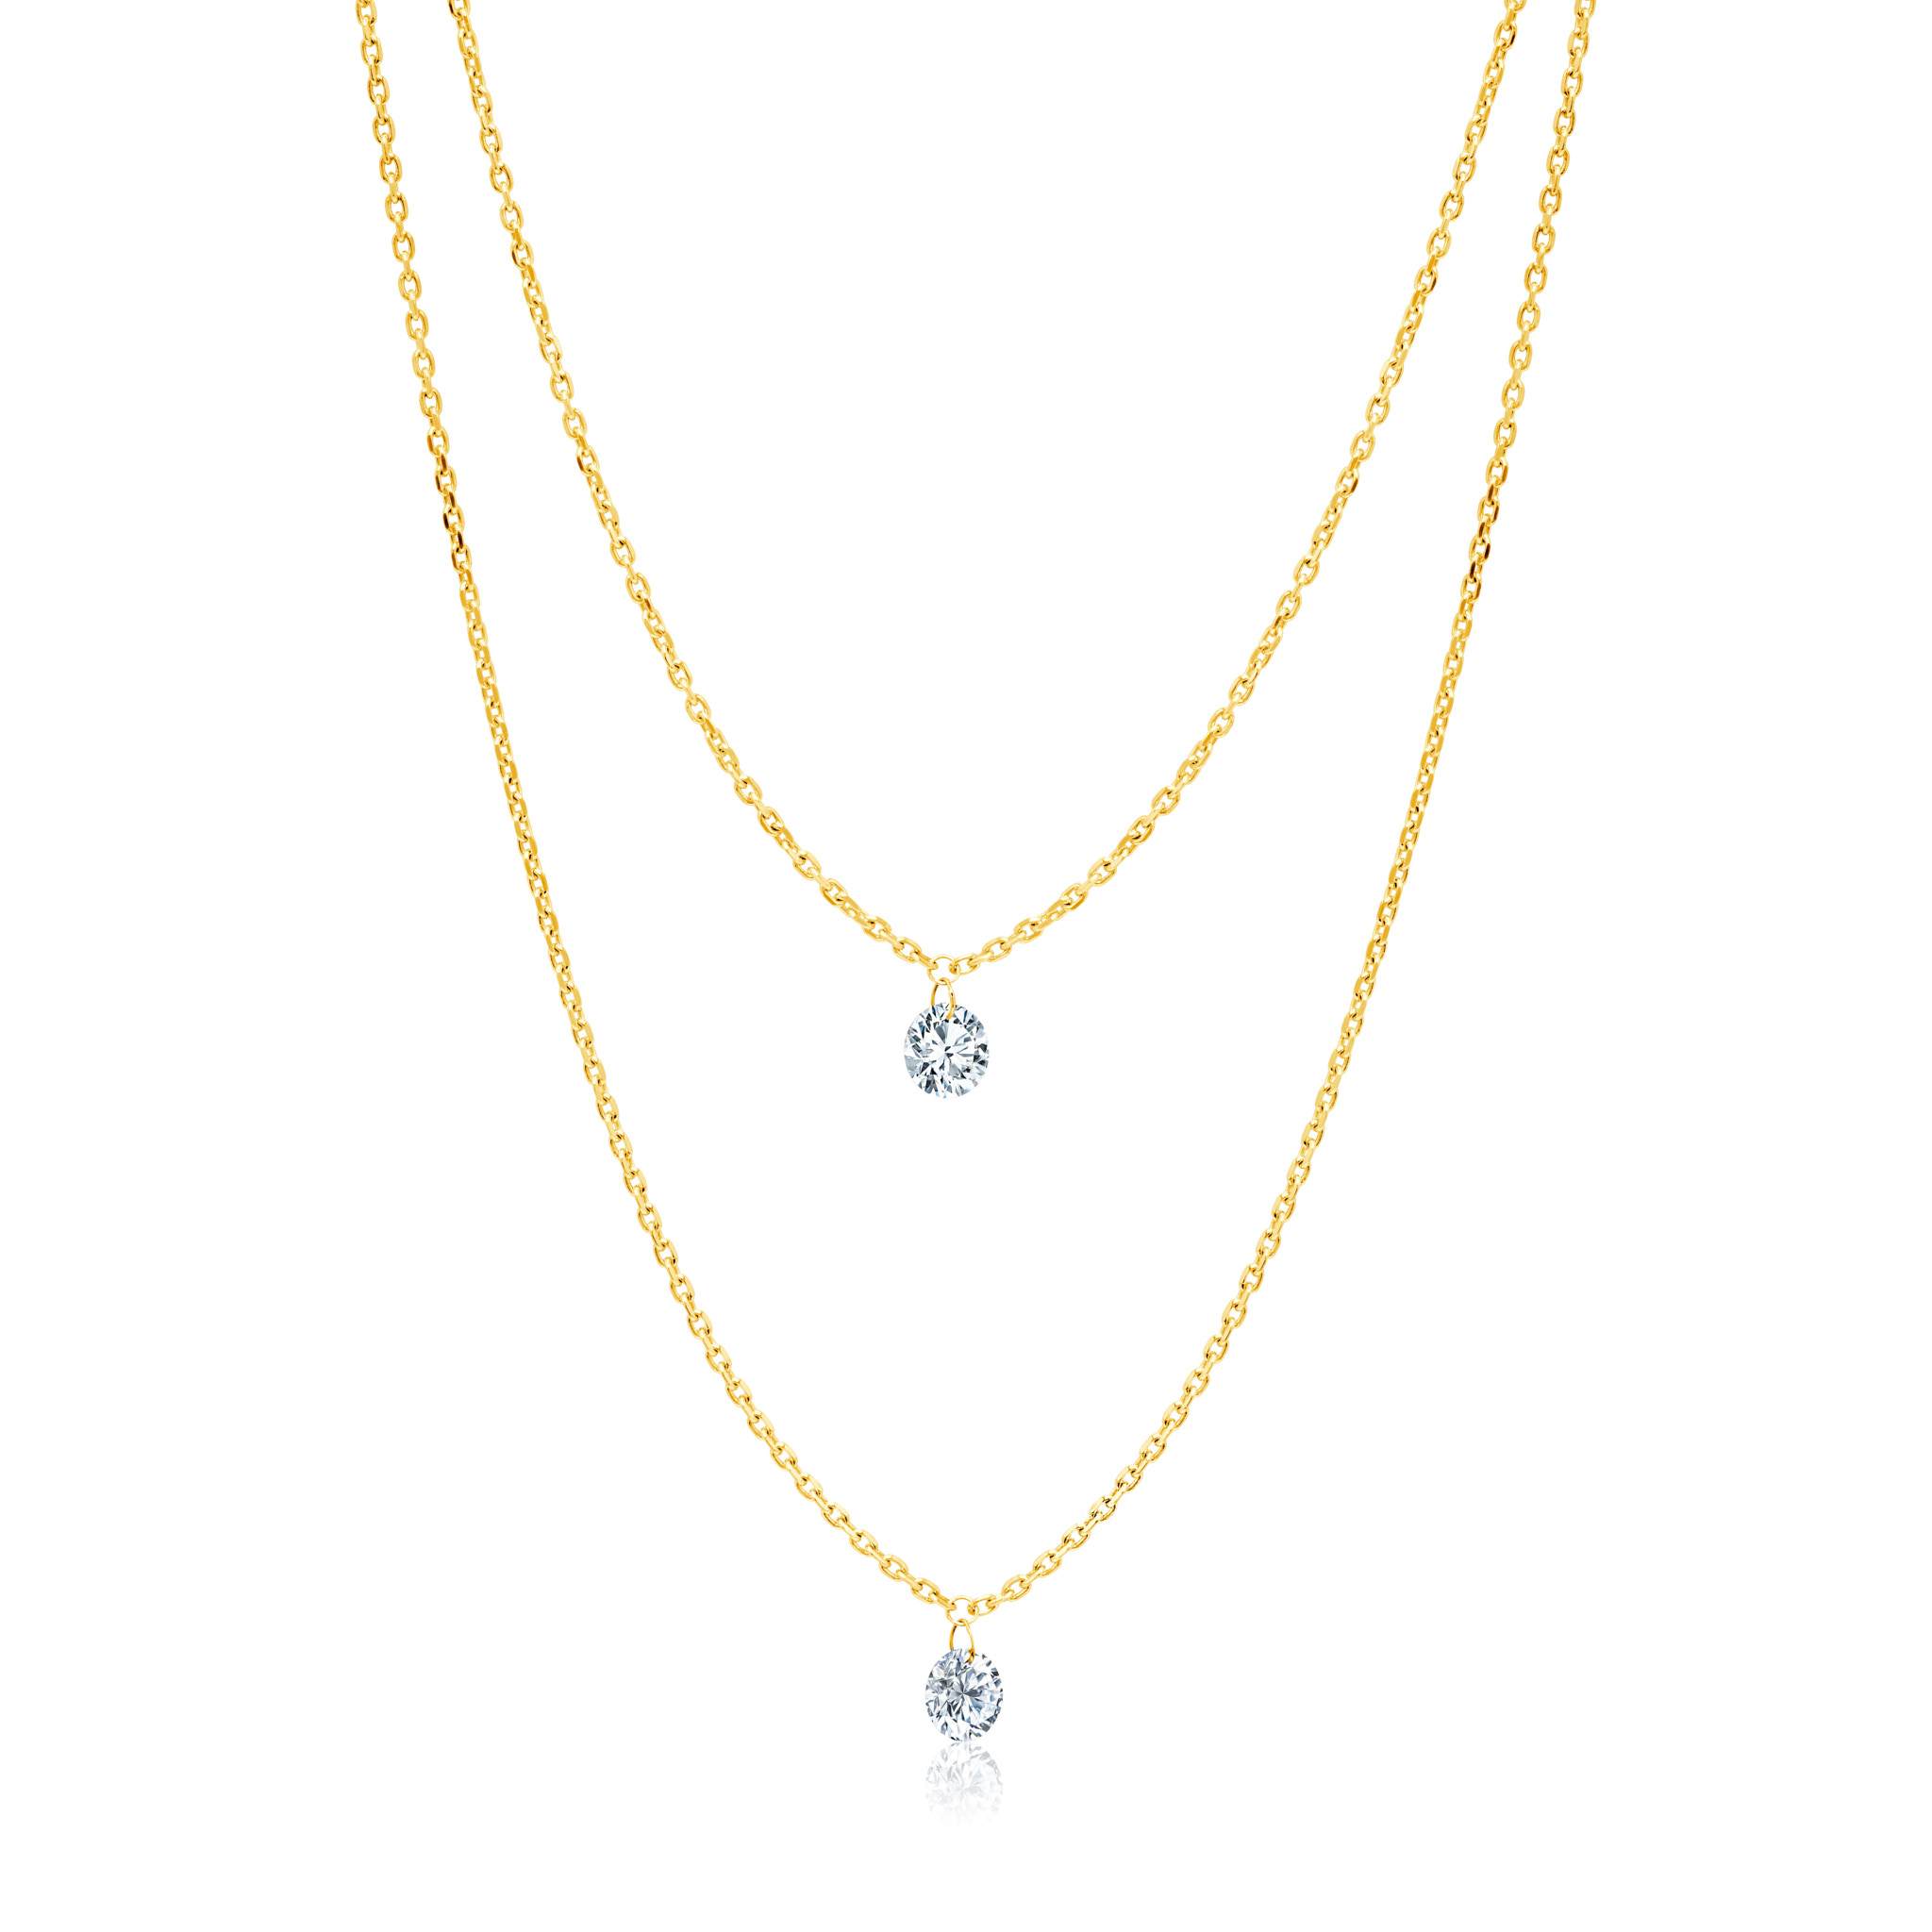 Graziela Gems - Necklace - Double Floating Diamond Necklace - Yellow Gold